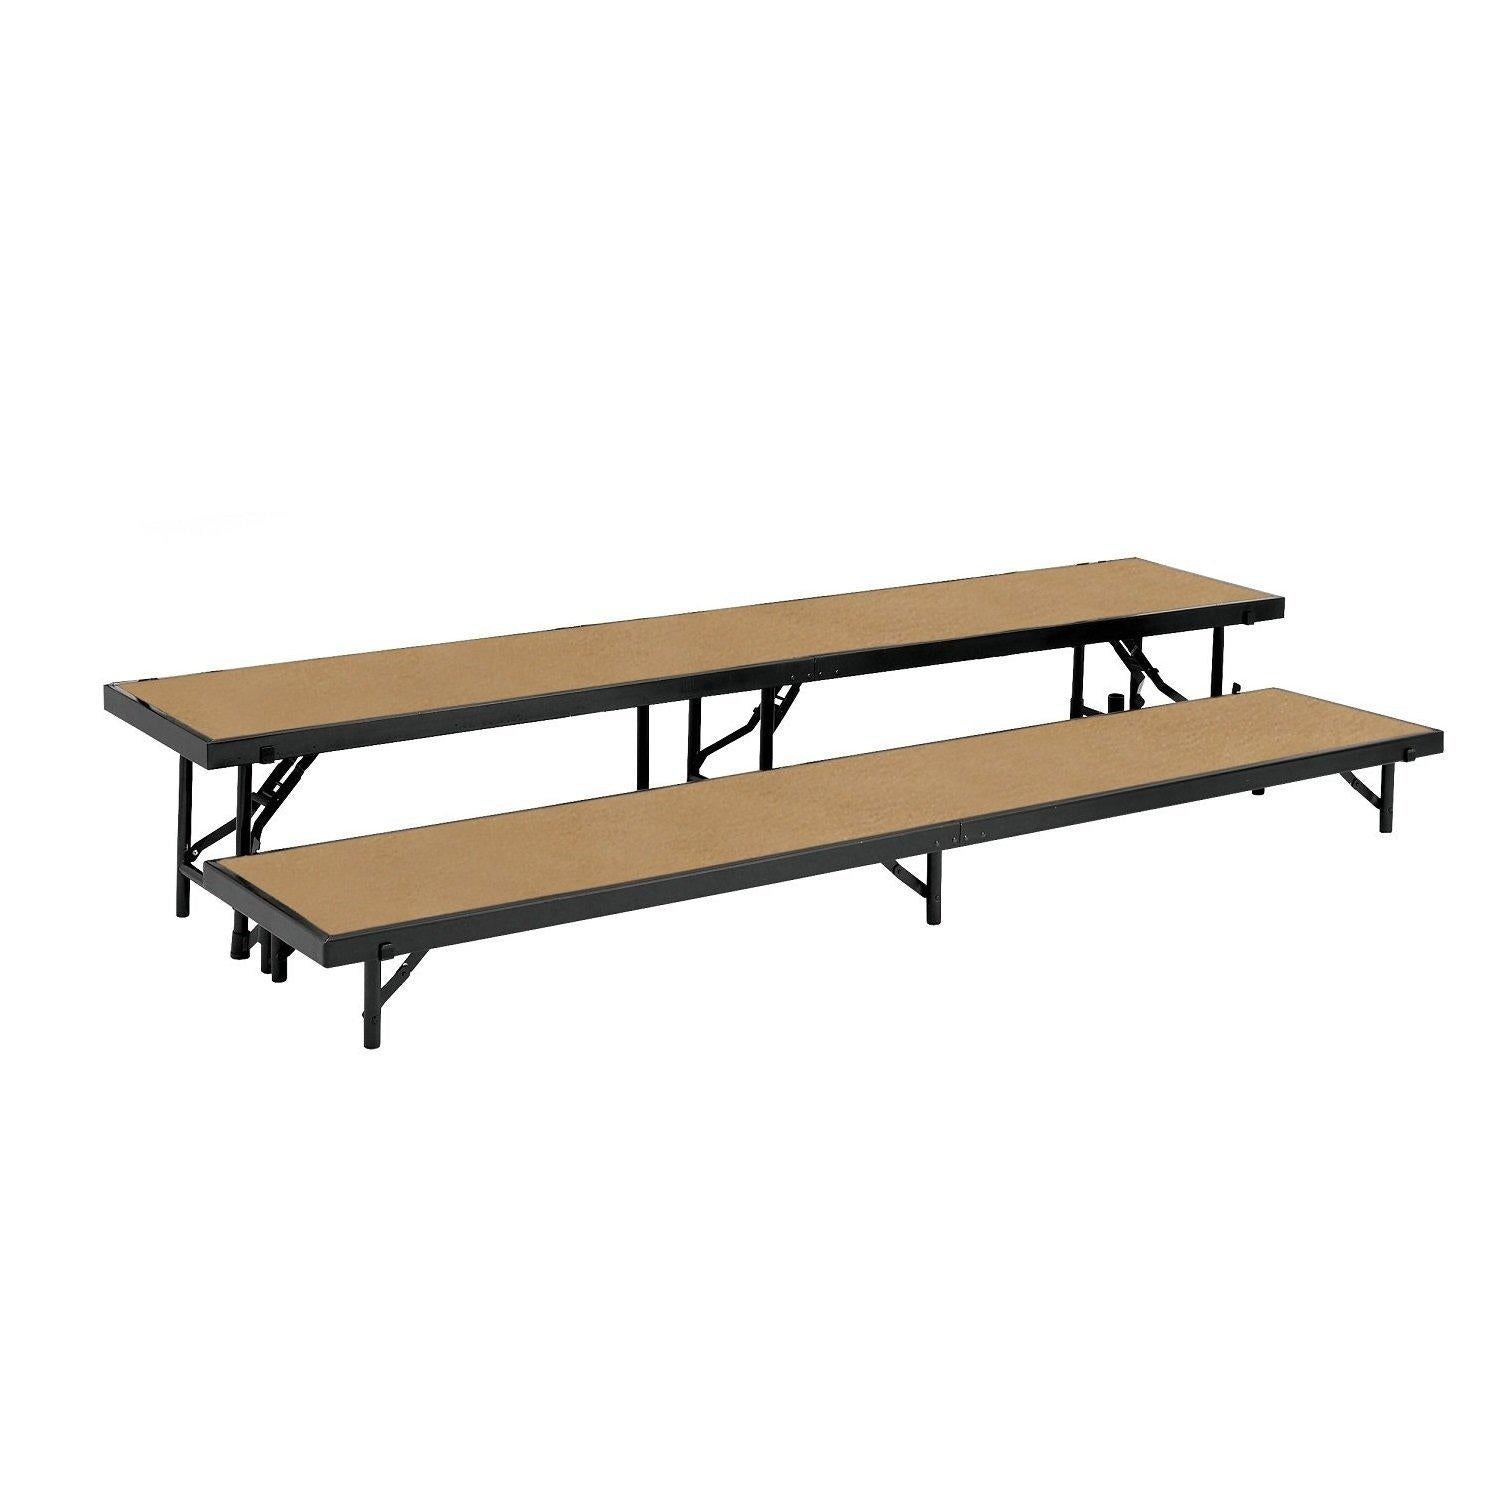 NPS® Multi-Level Straight Standing Choral Risers, 18" x 96" Platforms-Stages & Risers-2-Hardboard-